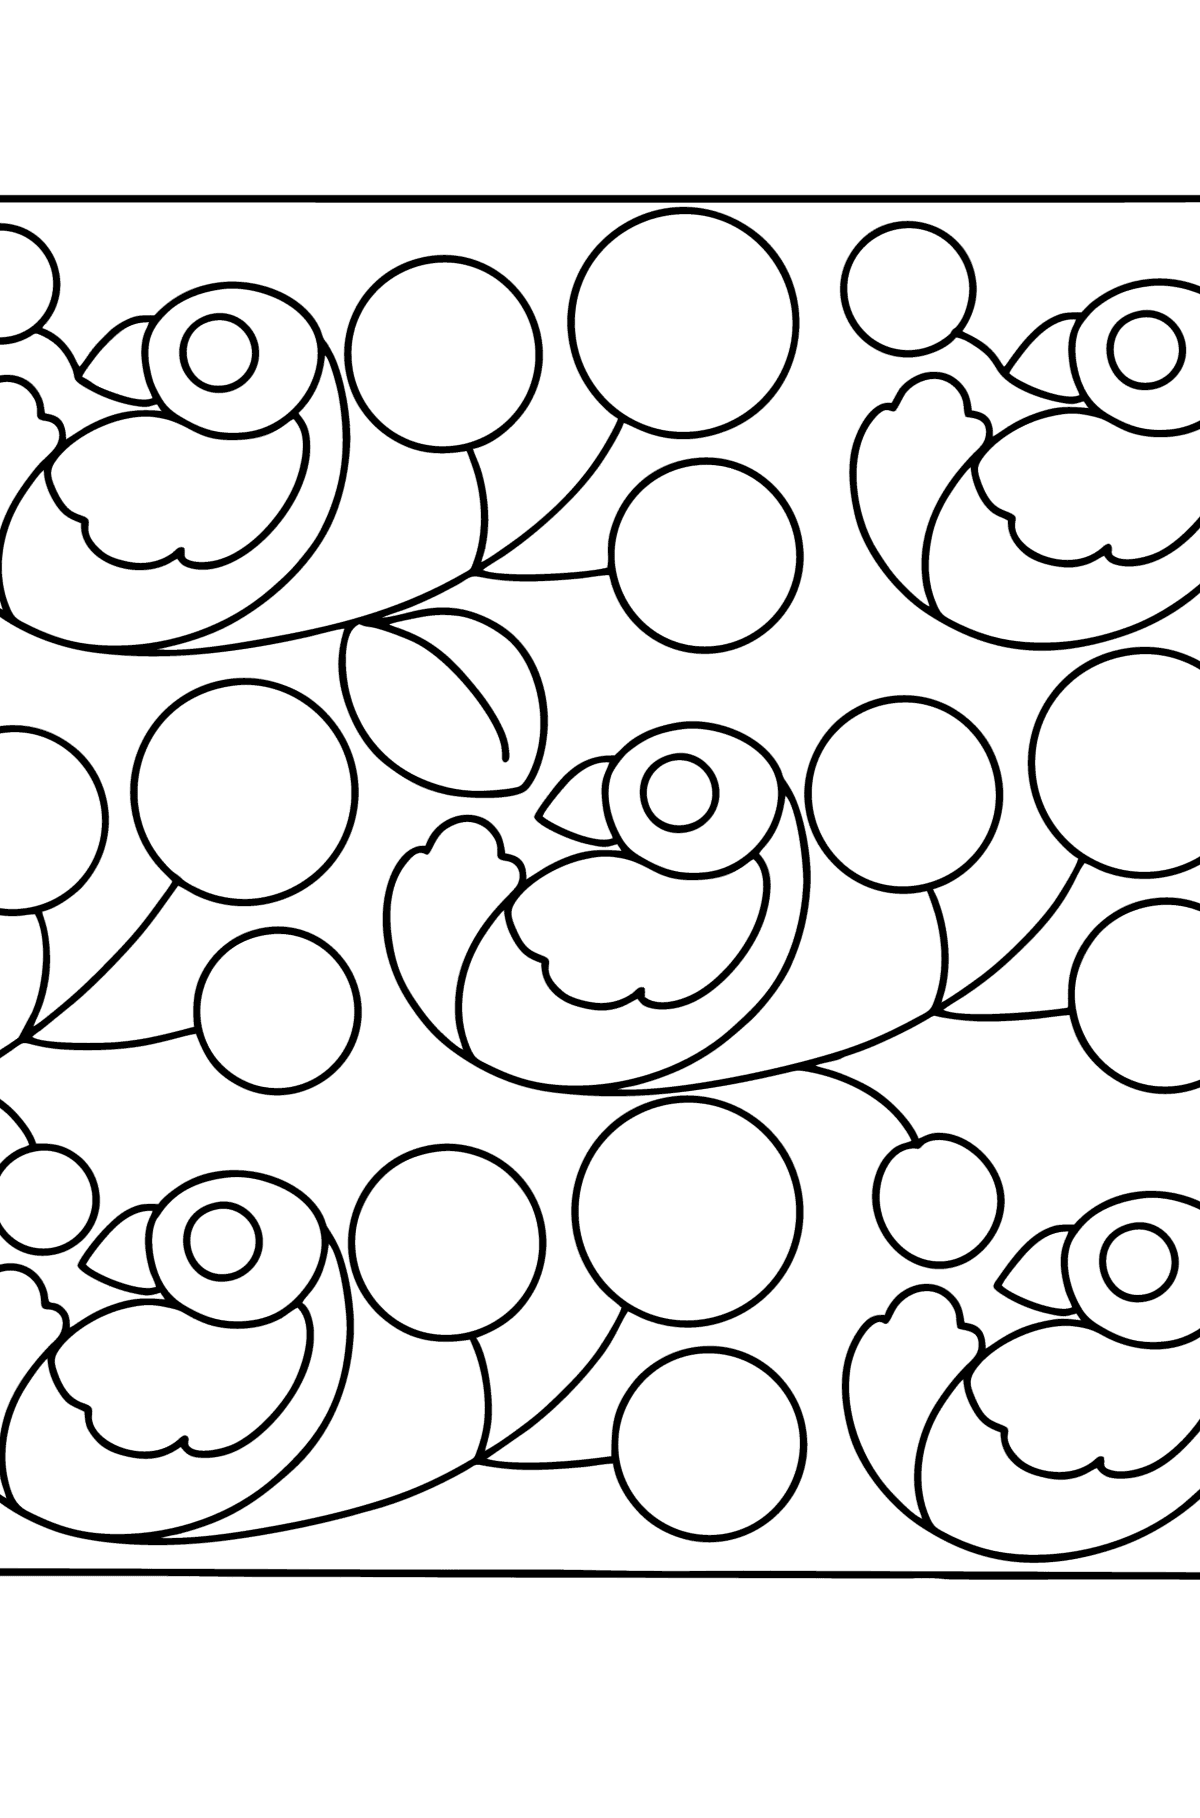 Bird Pattern coloring page - Coloring Pages for Kids